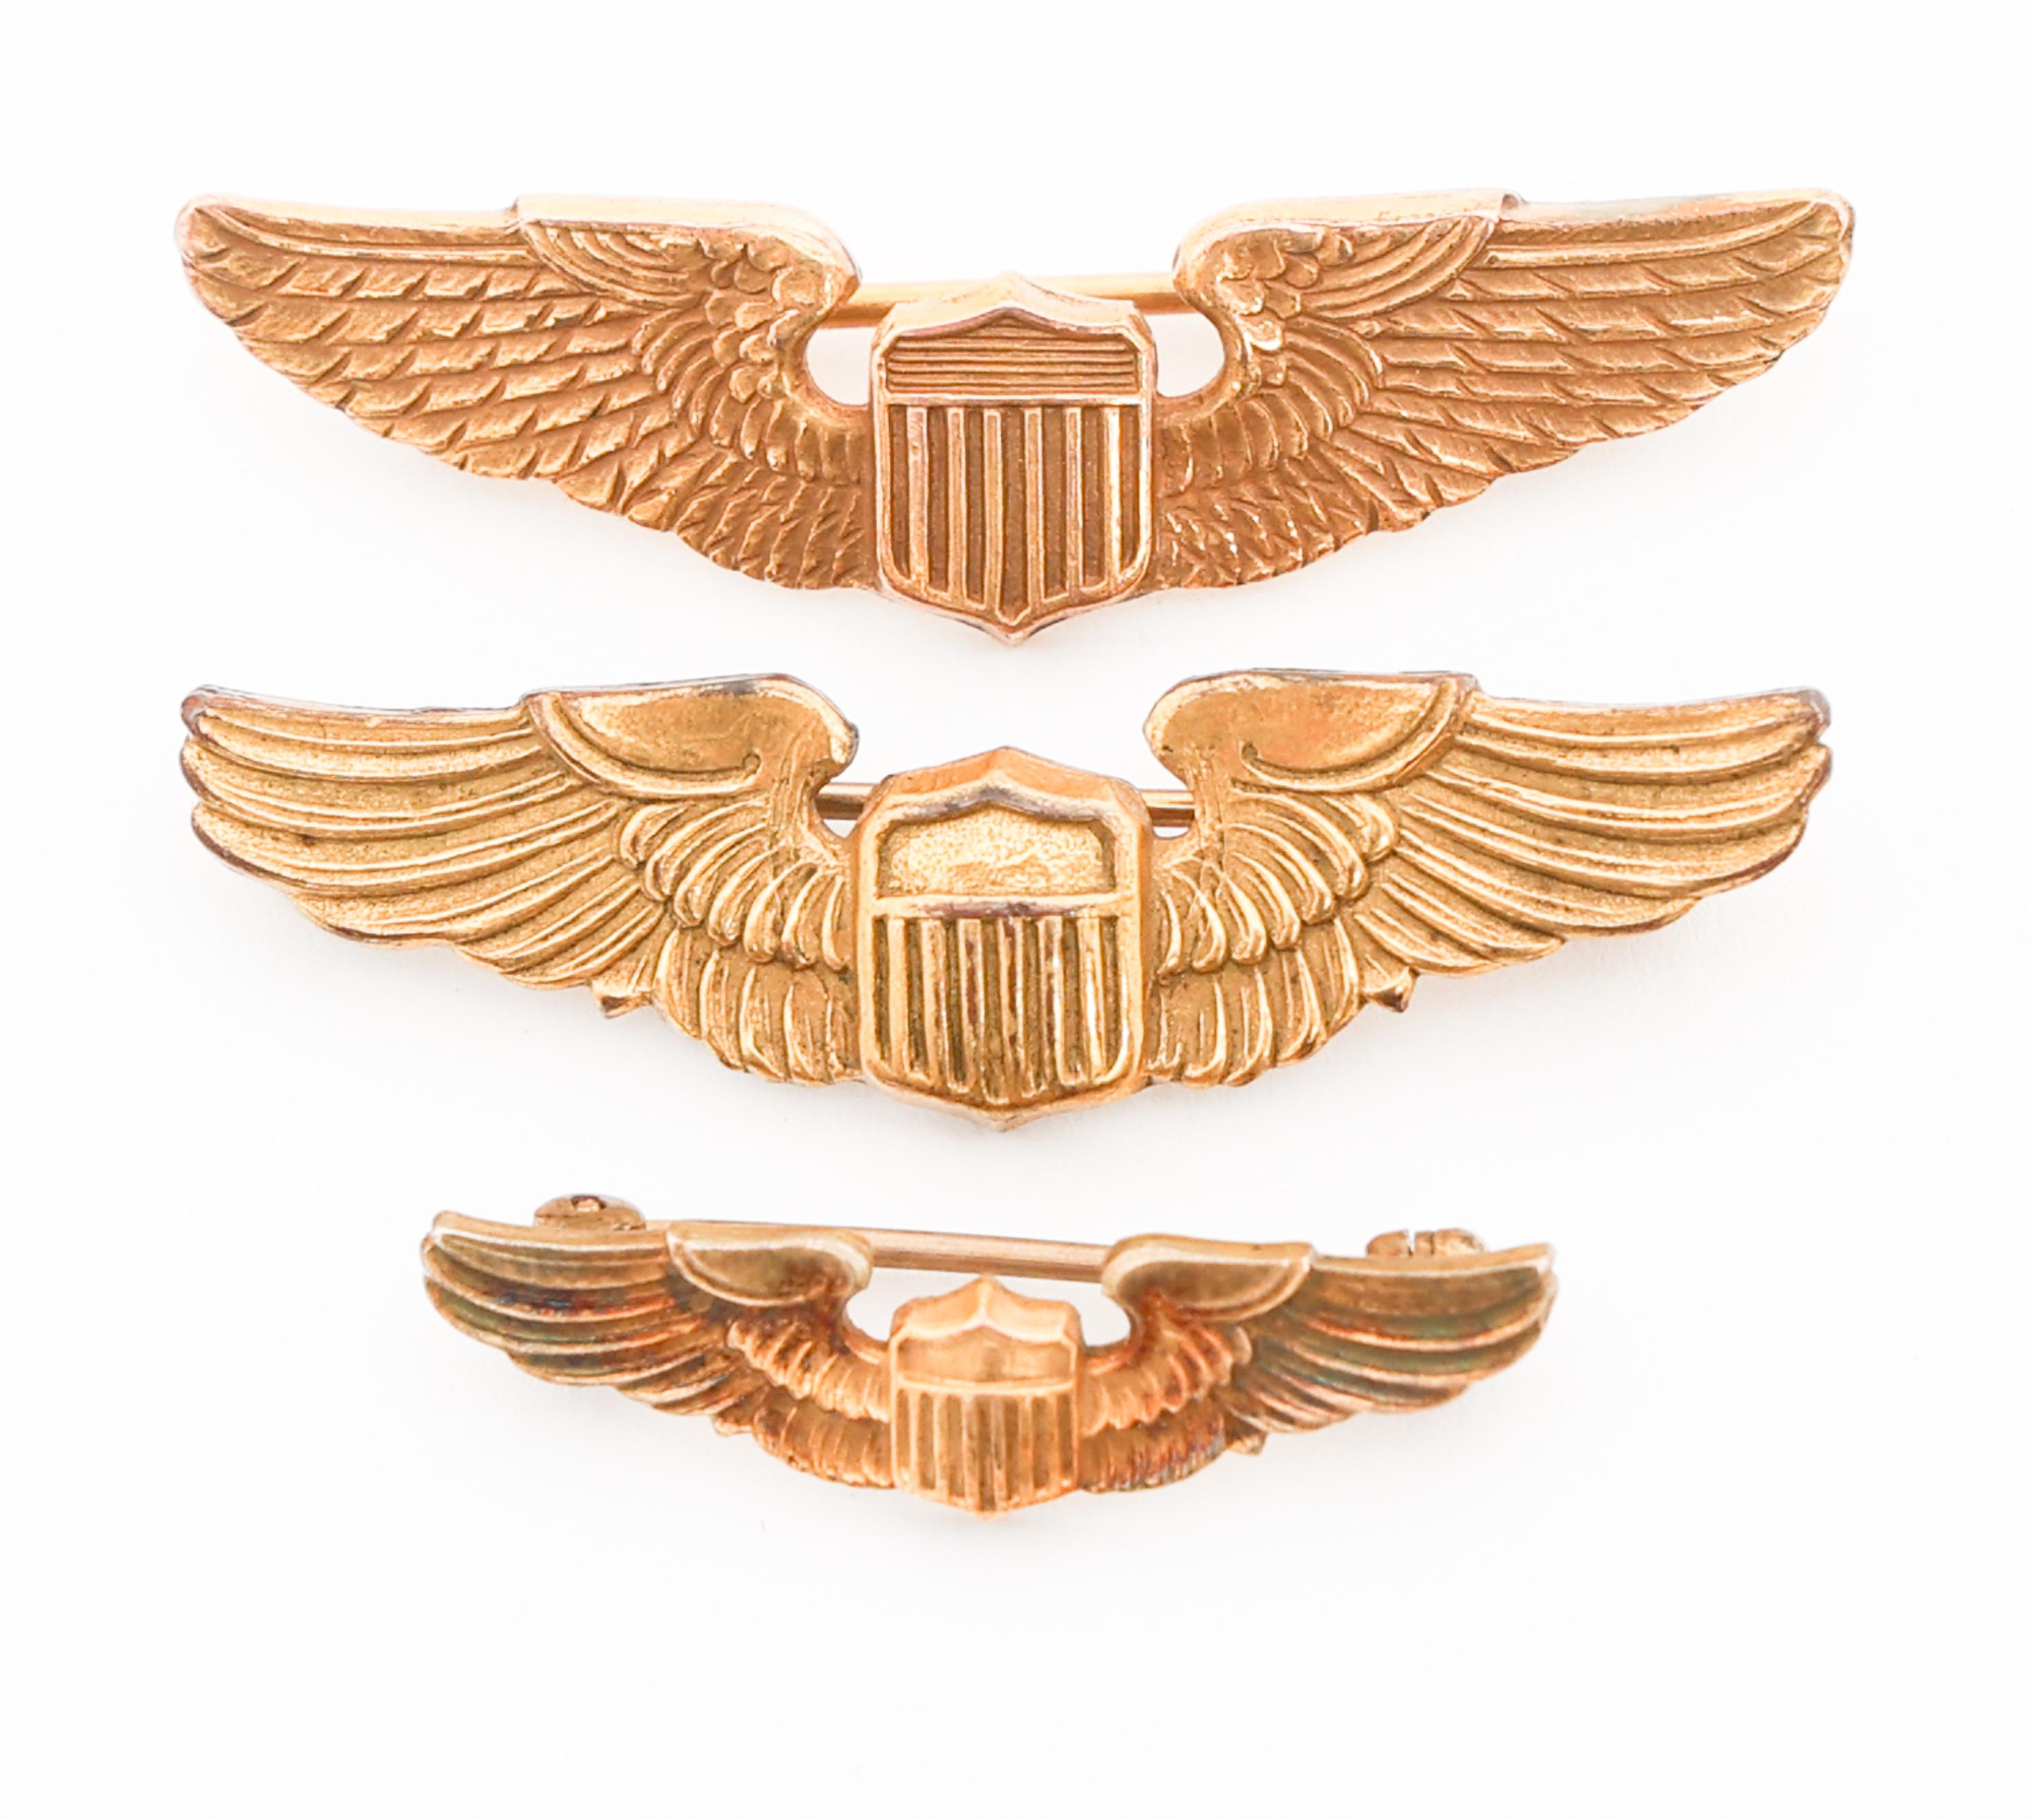 WWII US ARMY AIR FORCE FLIGHT INSTRUCTOR WINGS